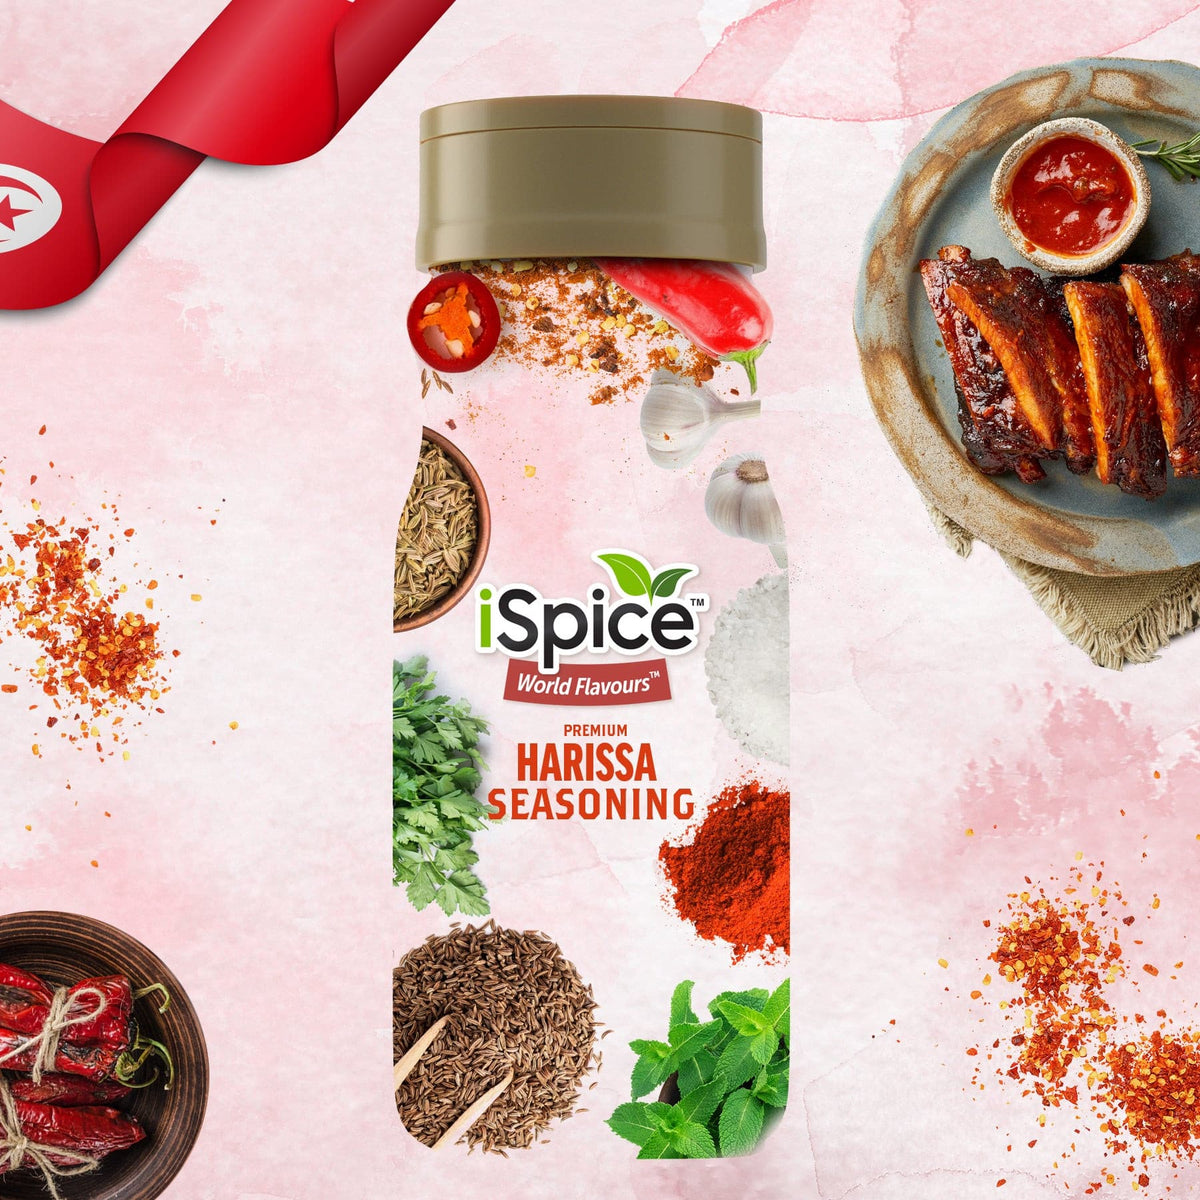 How to Make the Perfect Harissa Seasoning for Any Dish